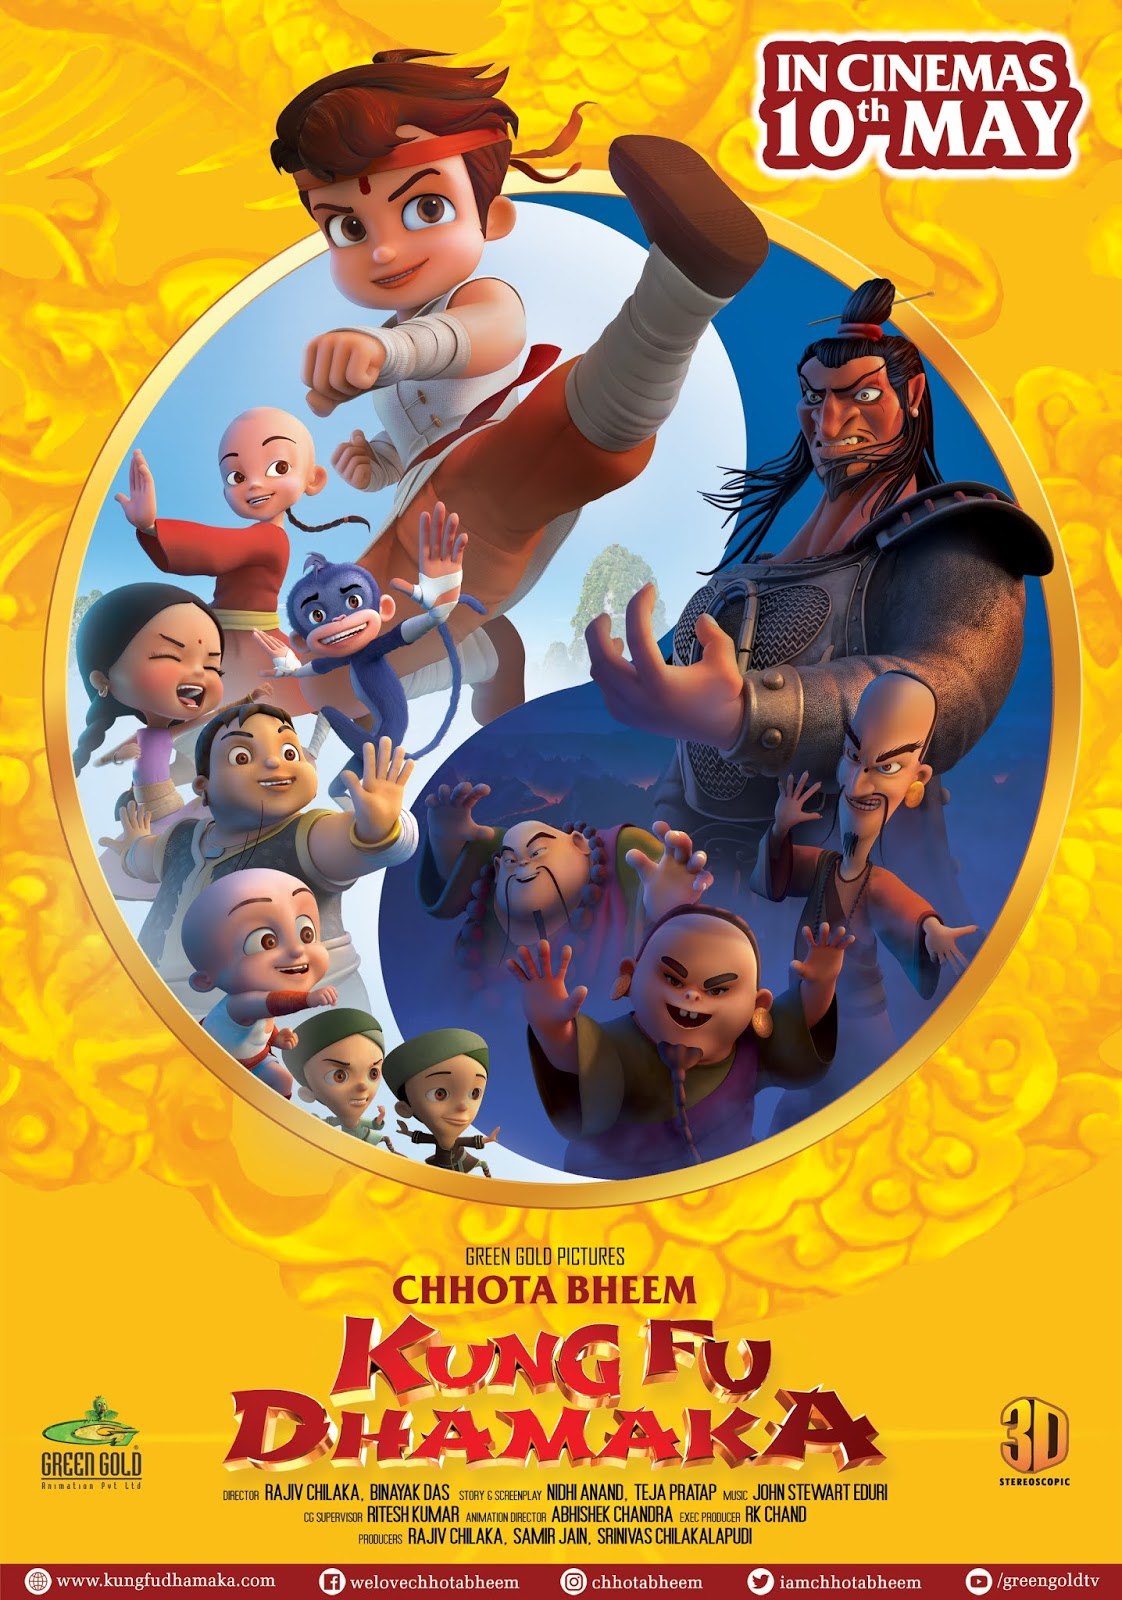 TRAILER: India's 'Chhota Bheem' Feature Gives Iconic Character an Upgrade |  Animation World Network